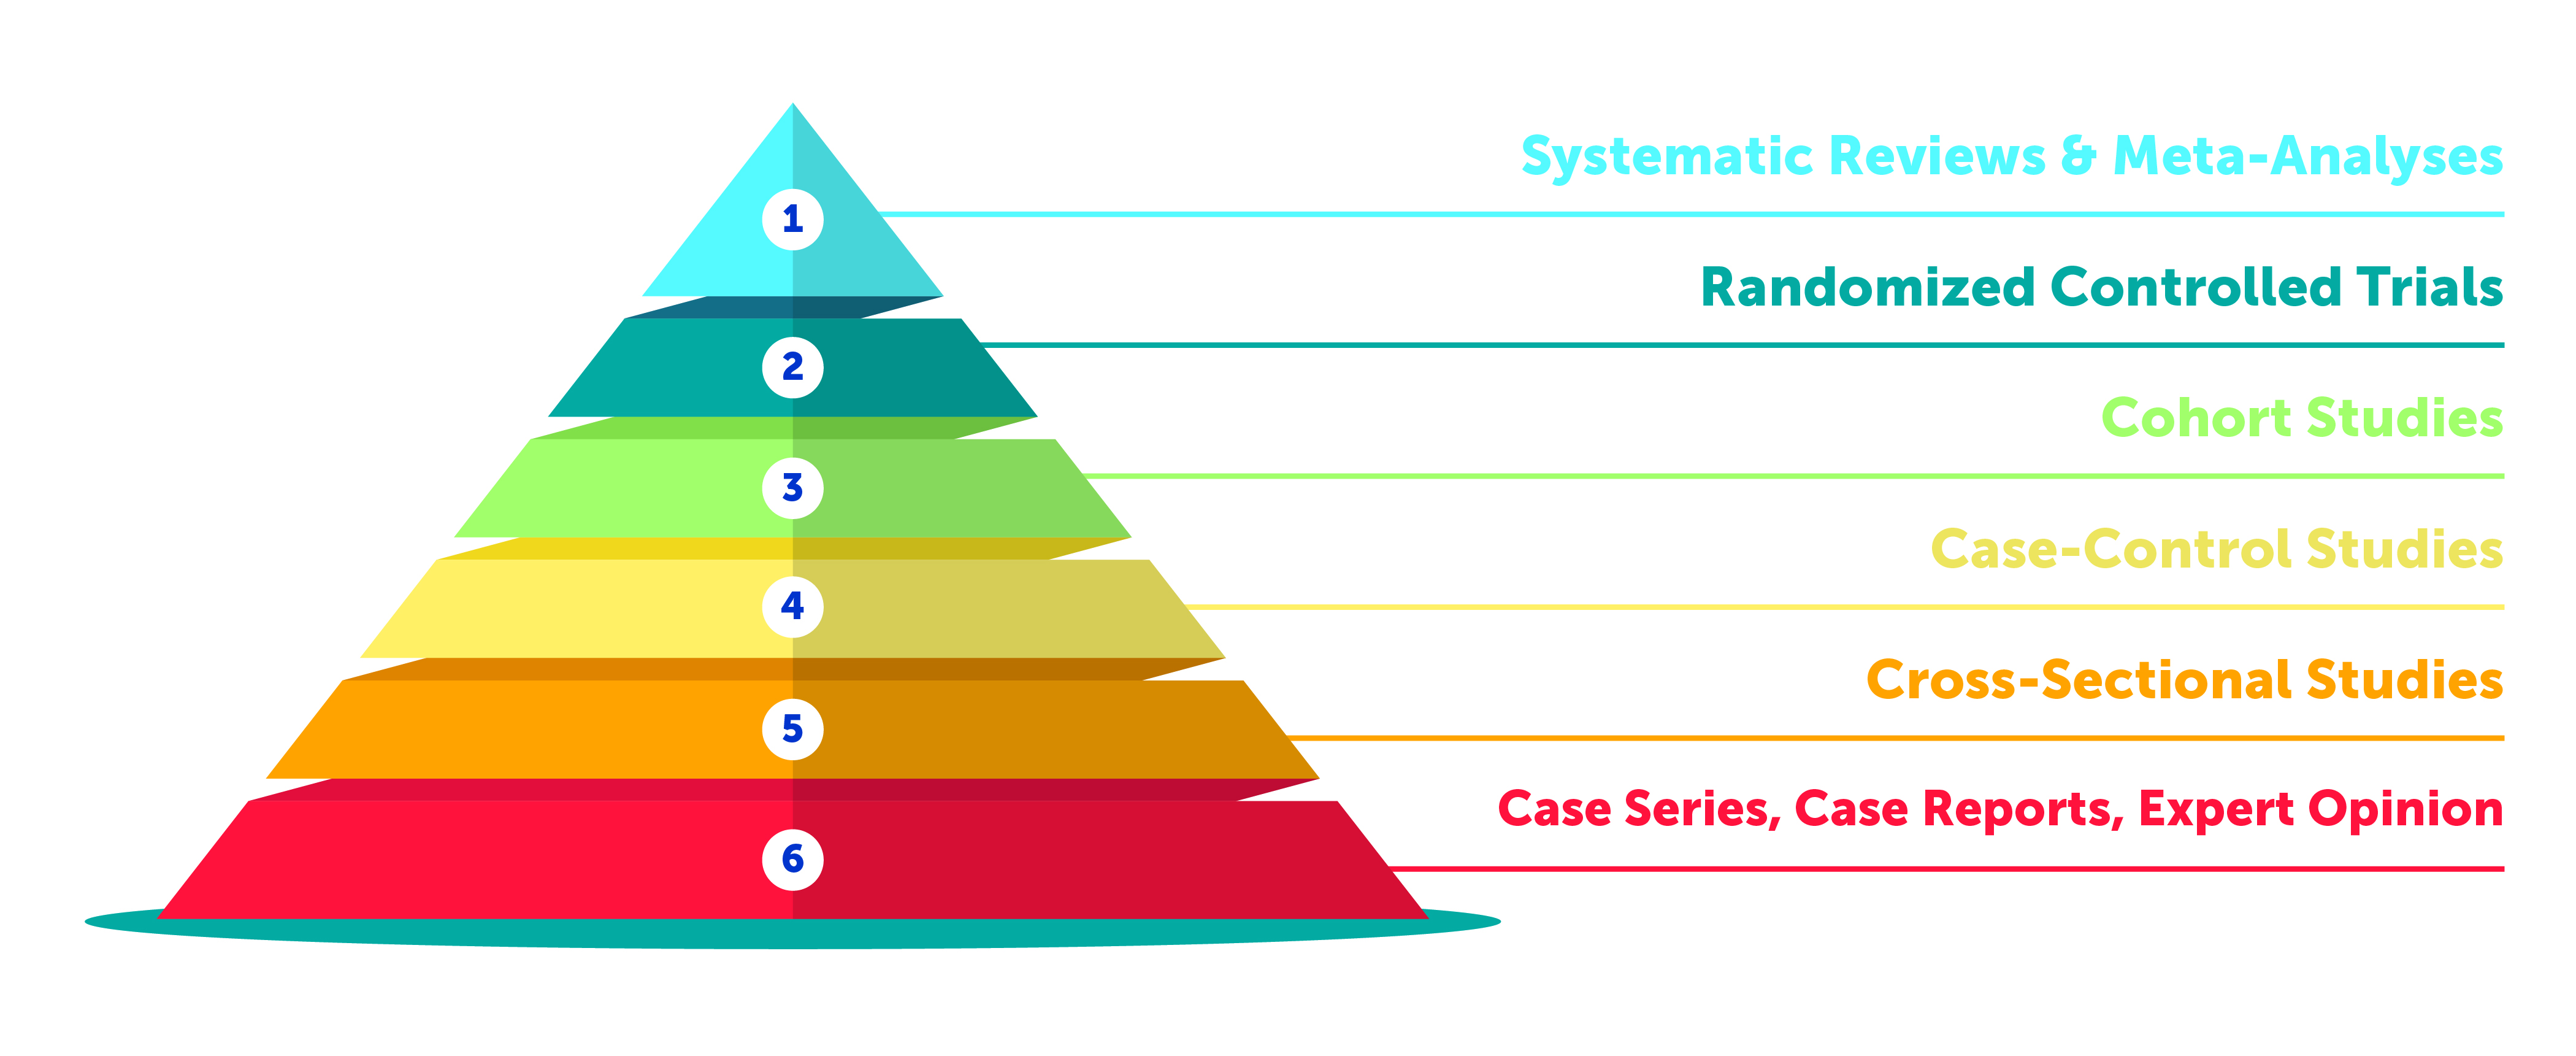 Clinical evidence hierarchy triangle; 1. systematic review and meta-analyses, 2. randomized controlled trials, 3. cohort studies, 4. case-control studies, 5. cross-sectional studies, 6. case series, case reports, expert opinion.